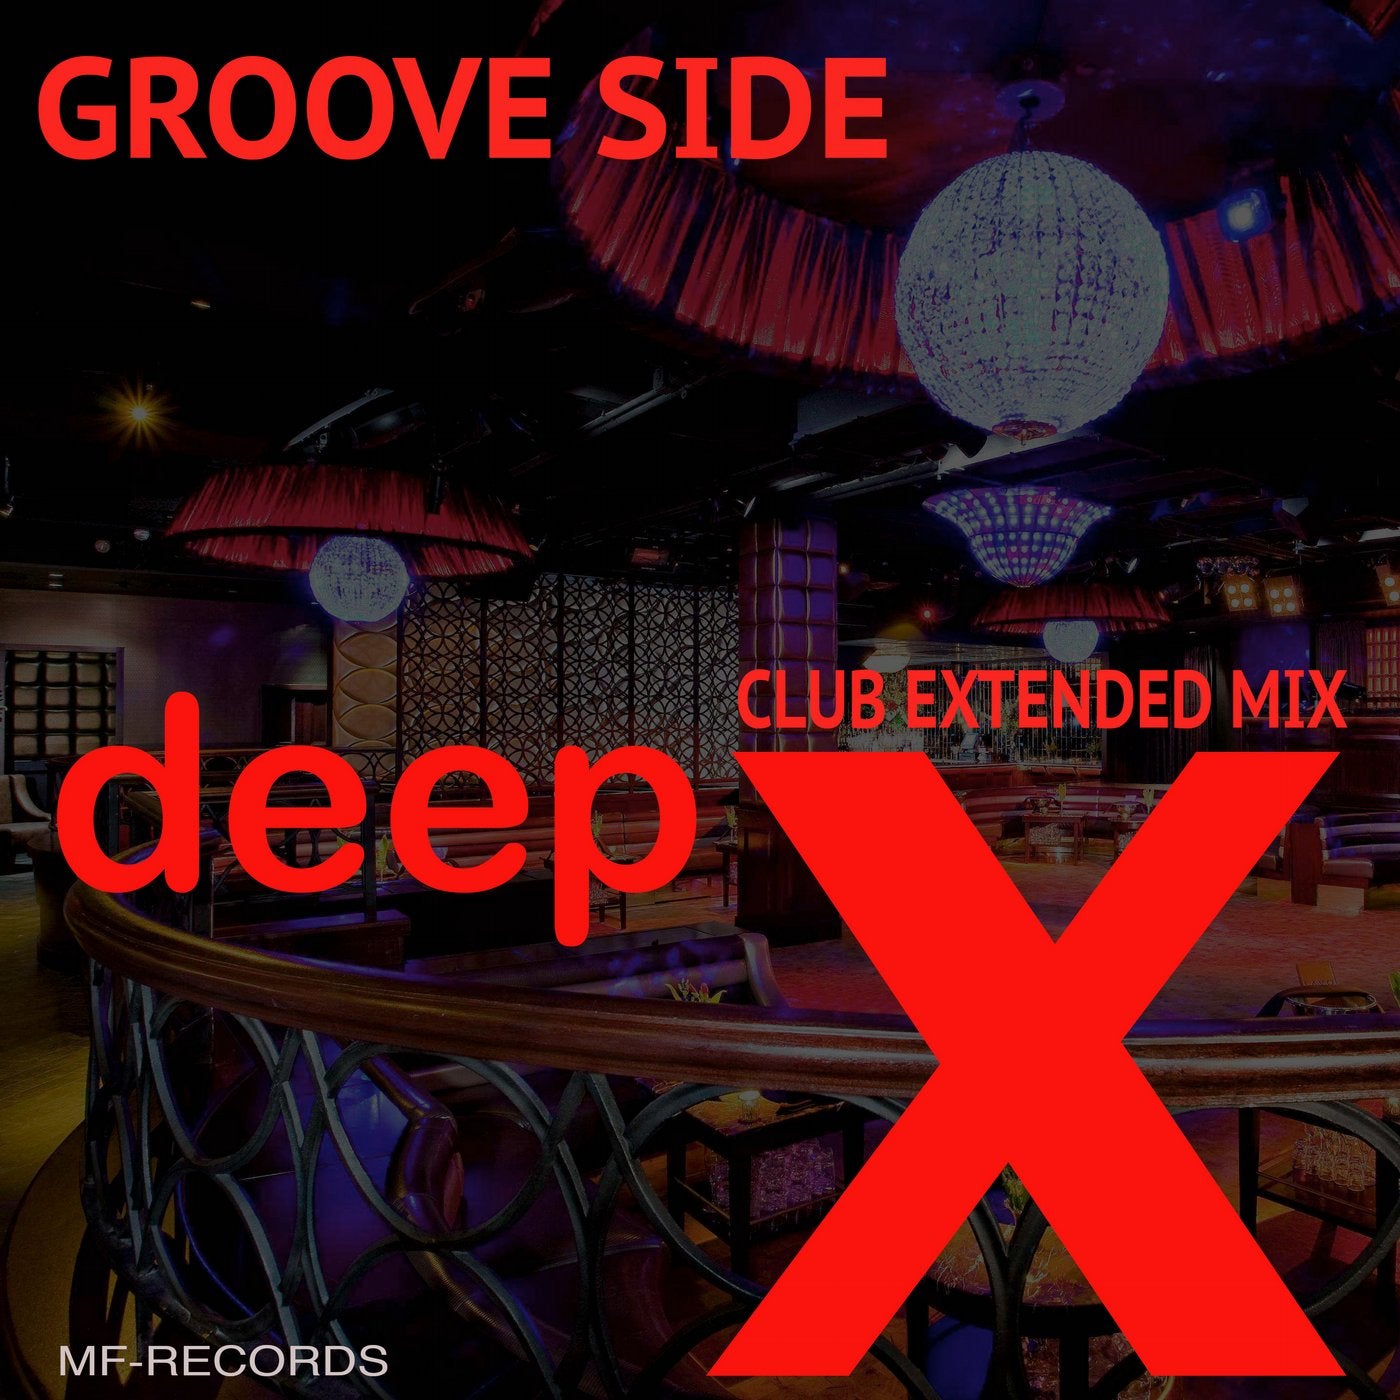 Groove Side(Club Extended Mix)